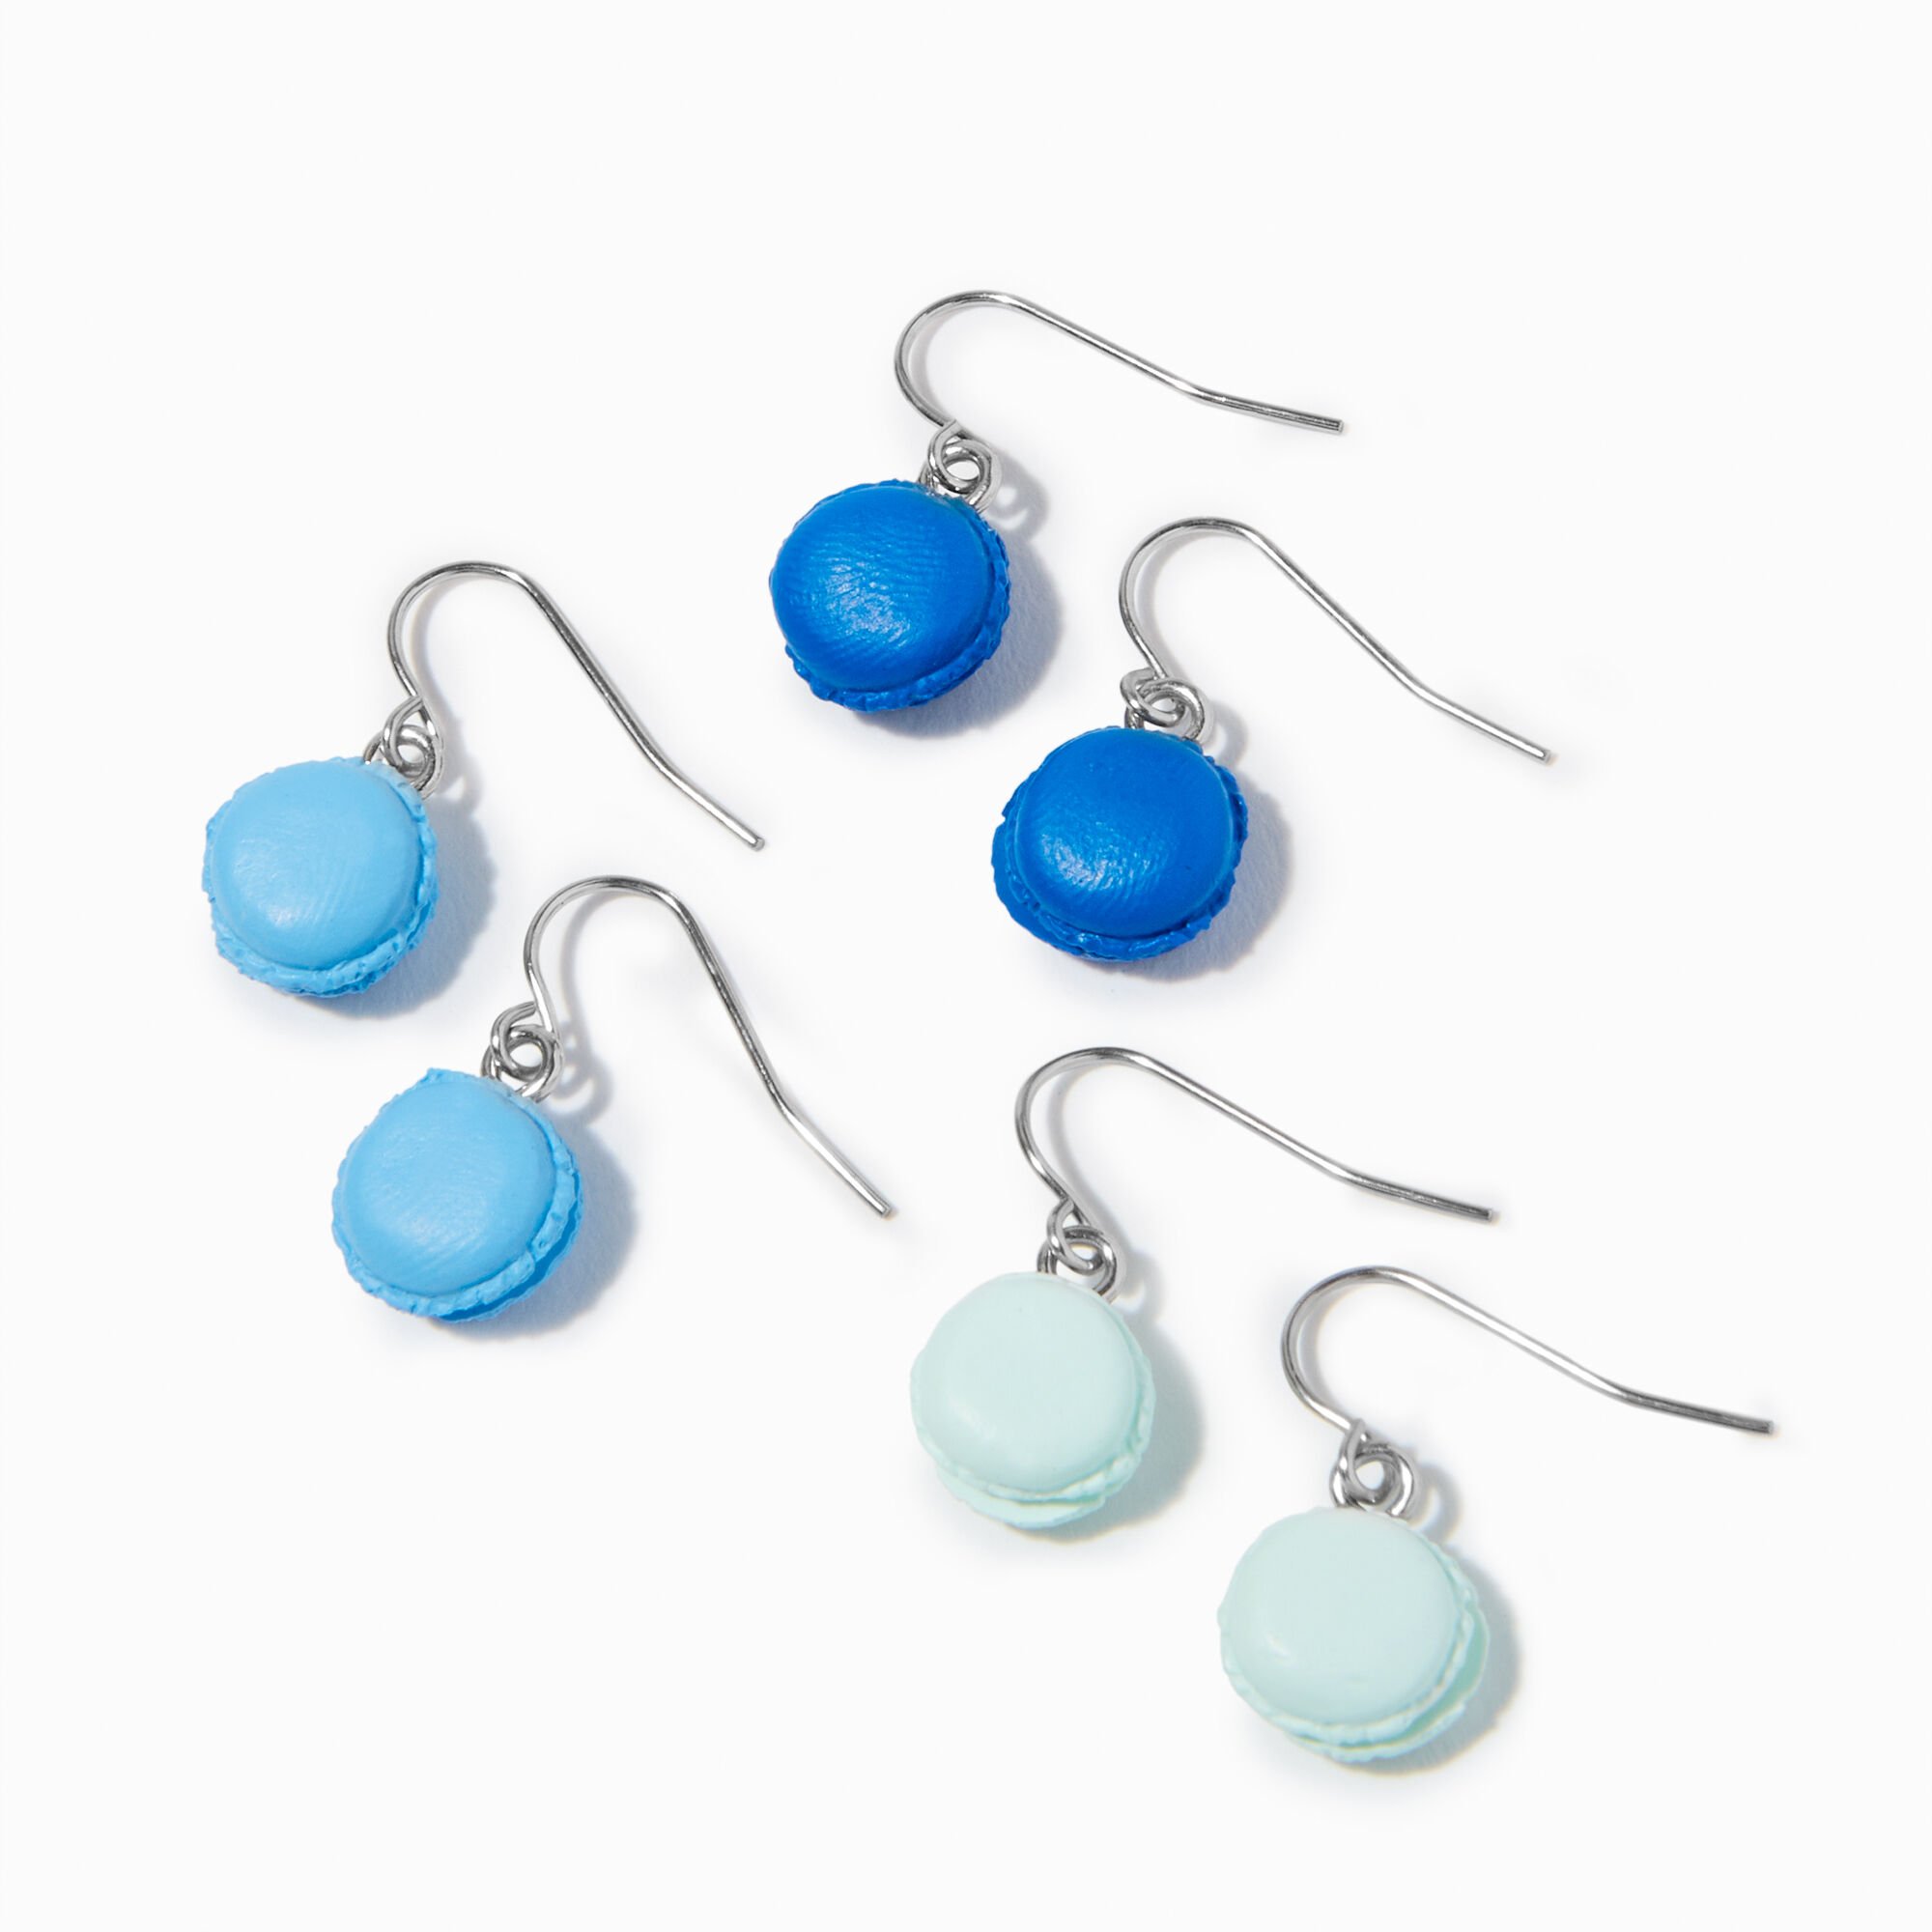 View Claires 1 Macaron Drop Earrings 3 Pack Blue information